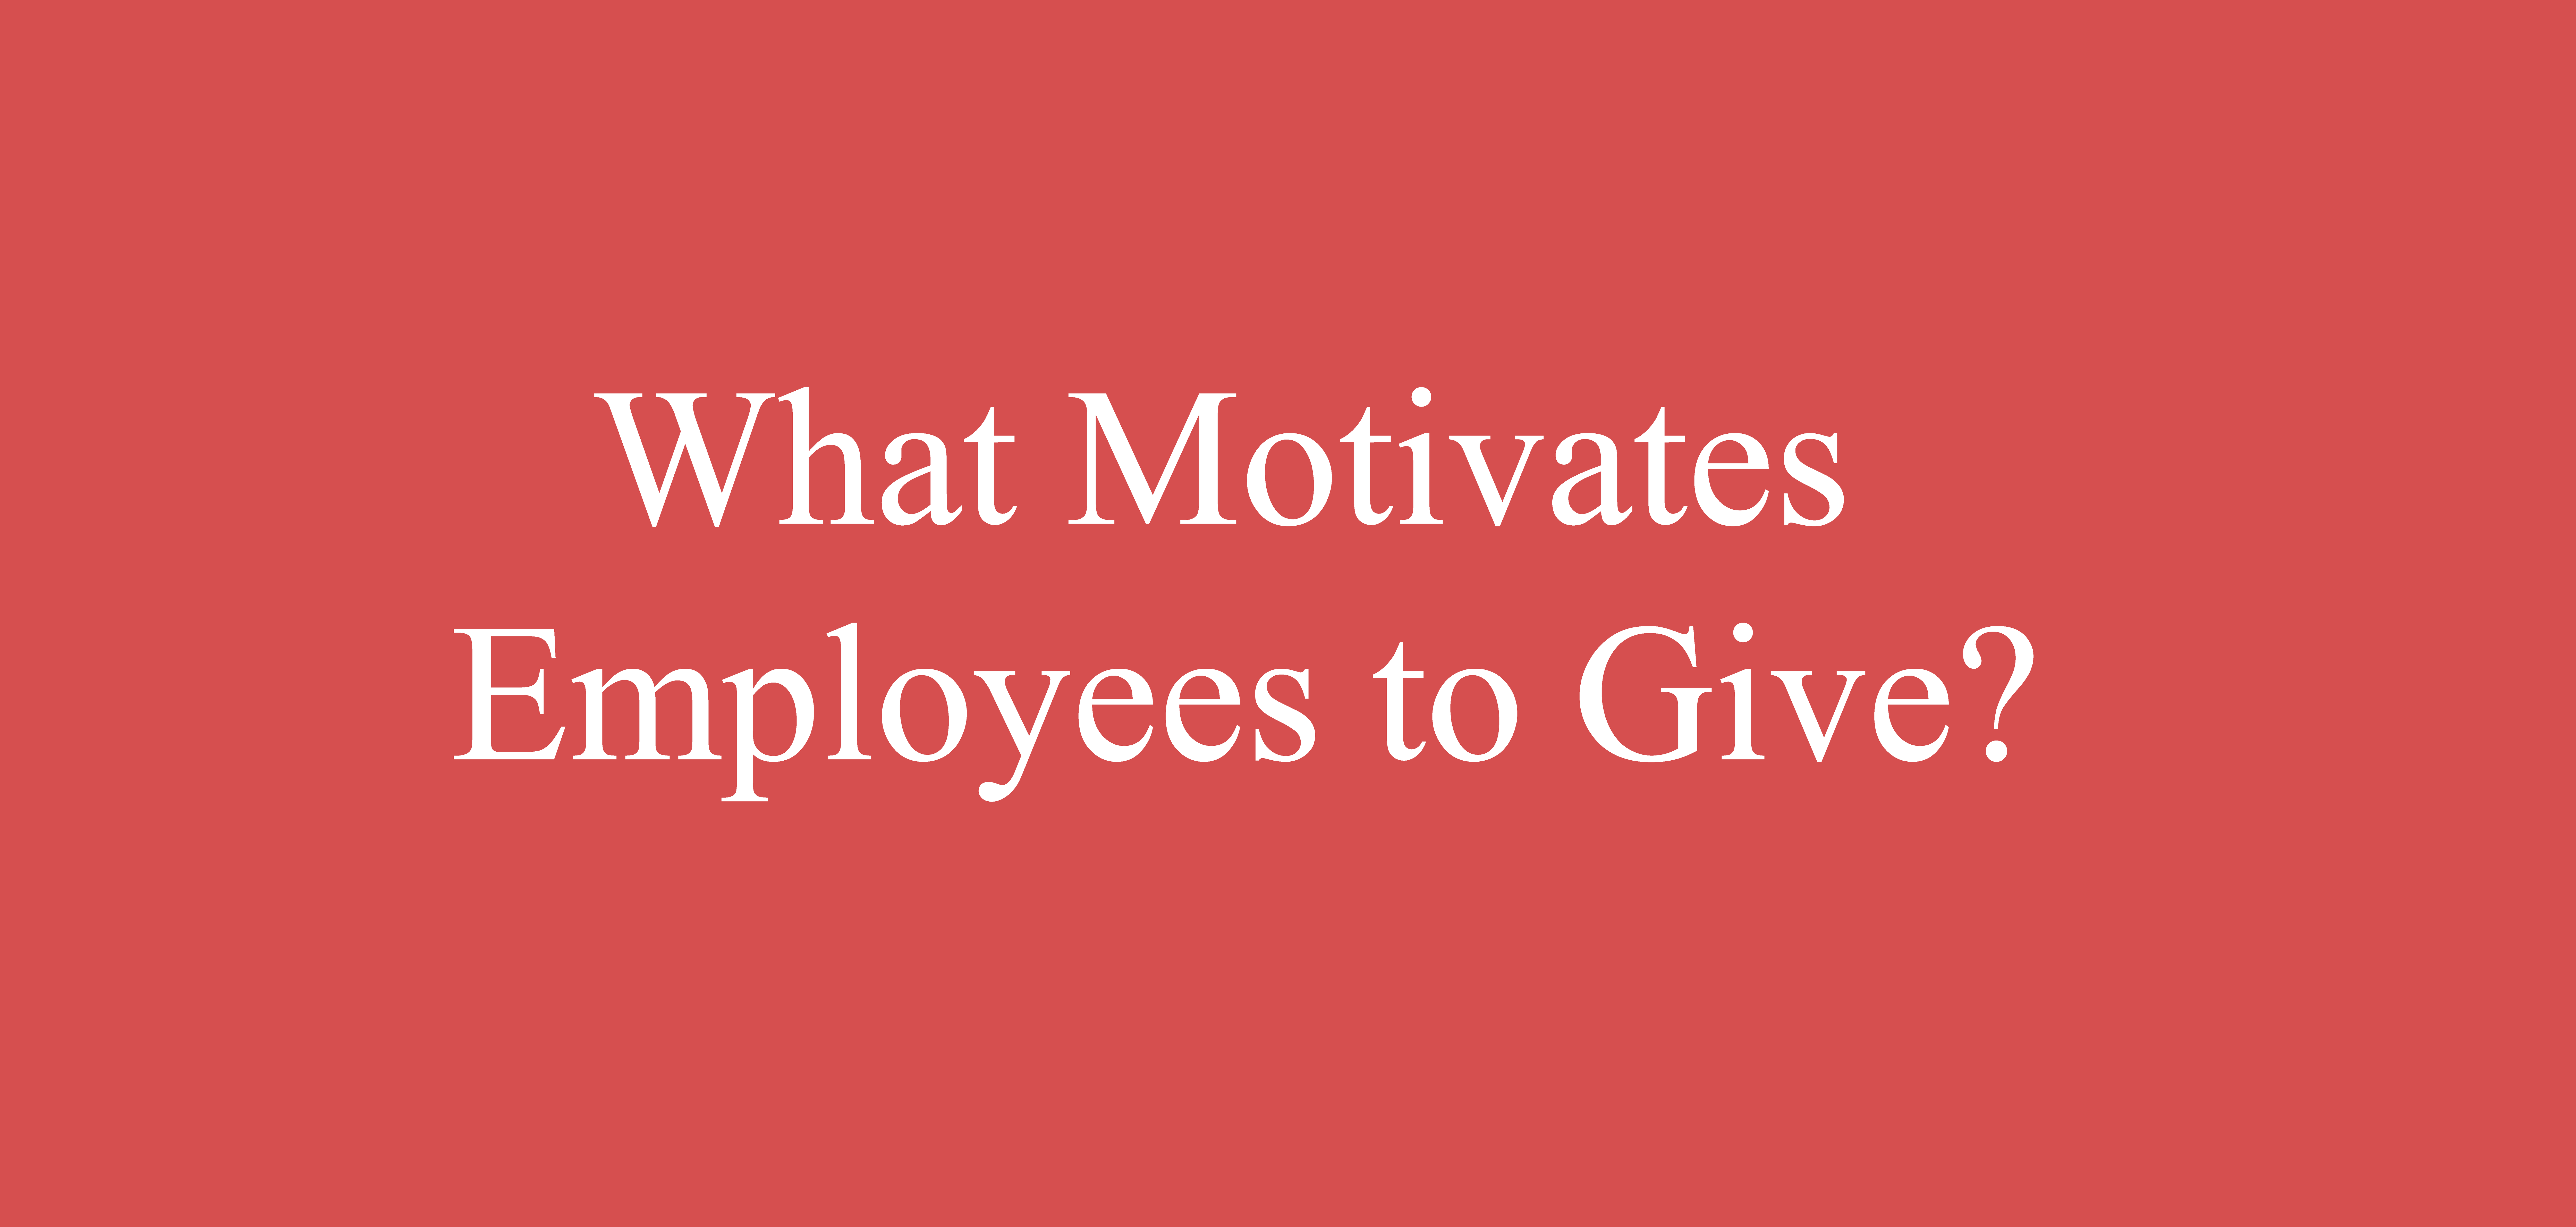 What Motivates Madison College Employees to Give?